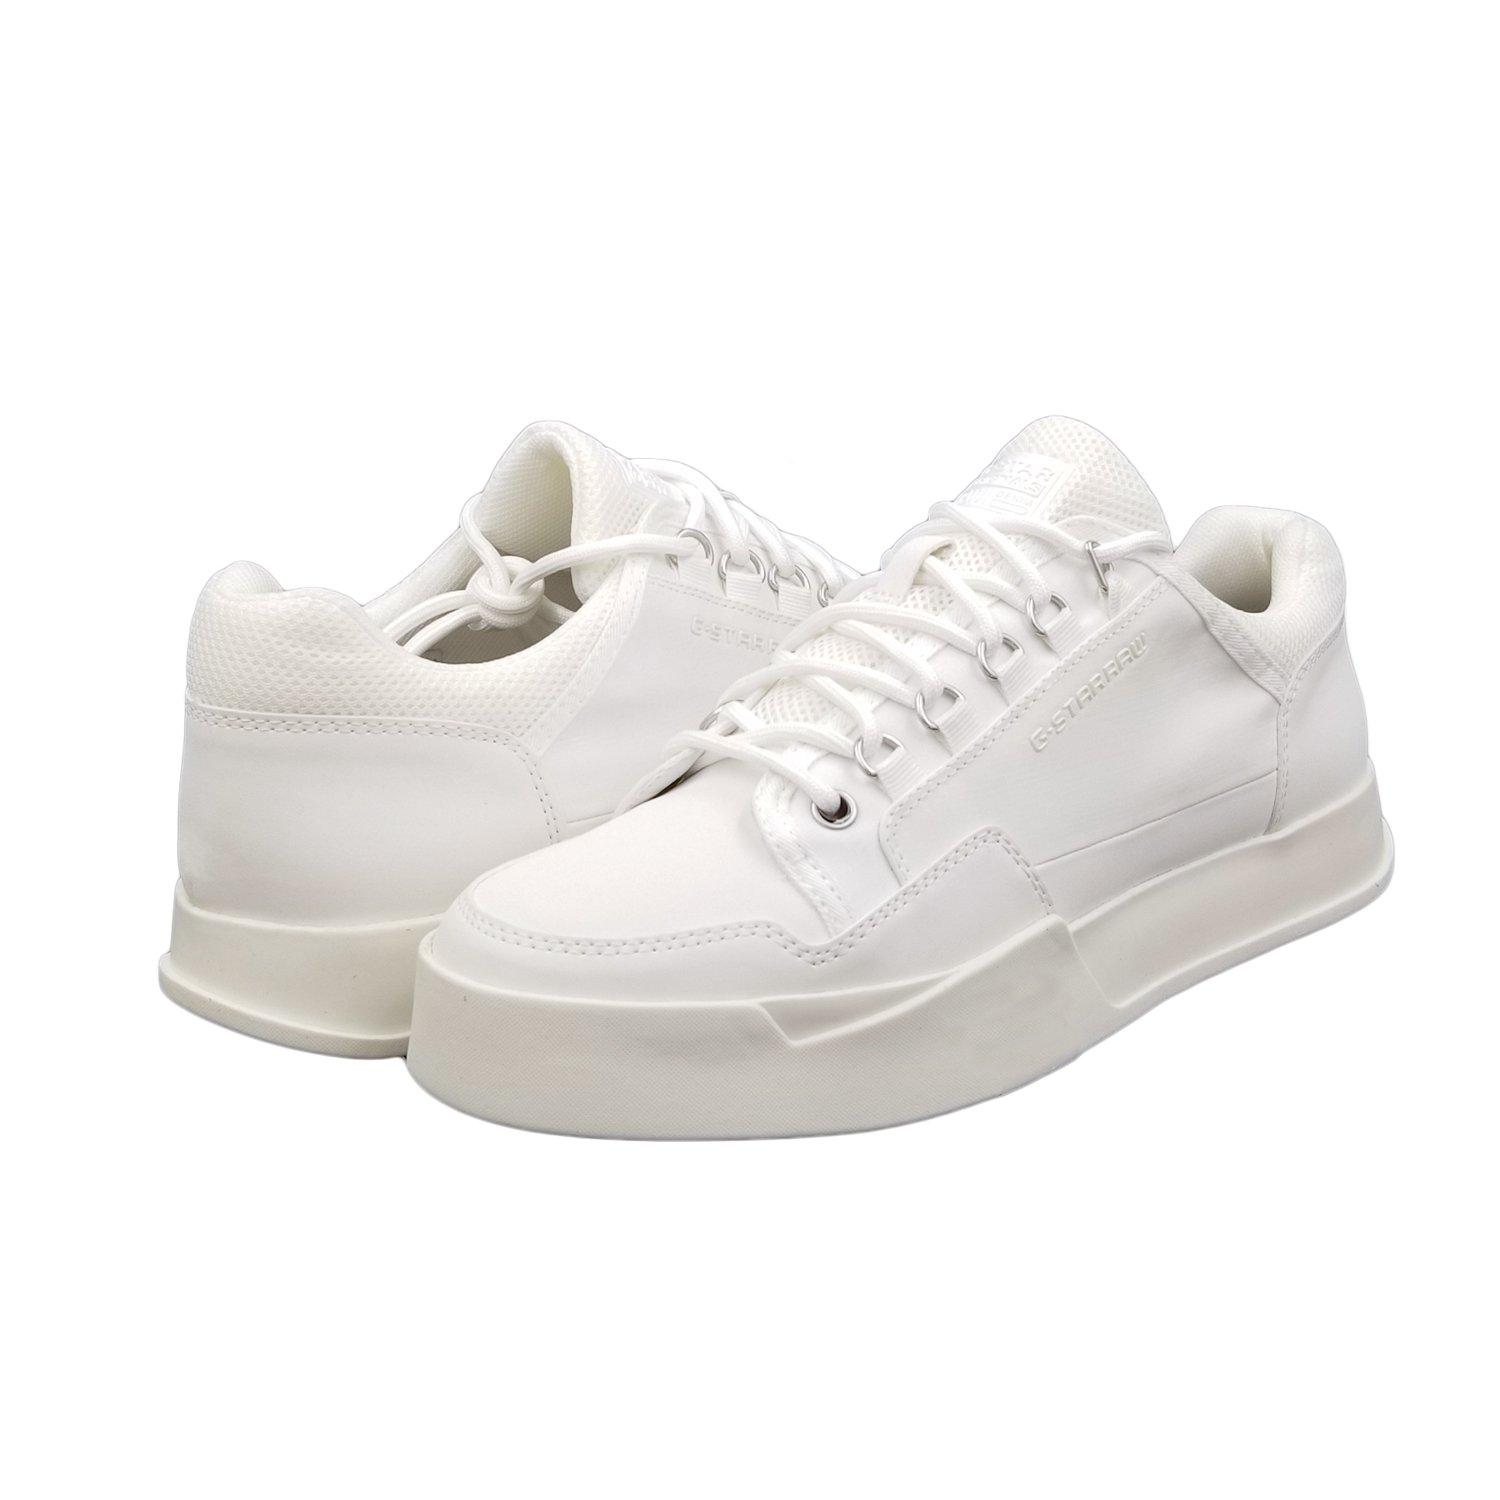 g star raw sneakers images